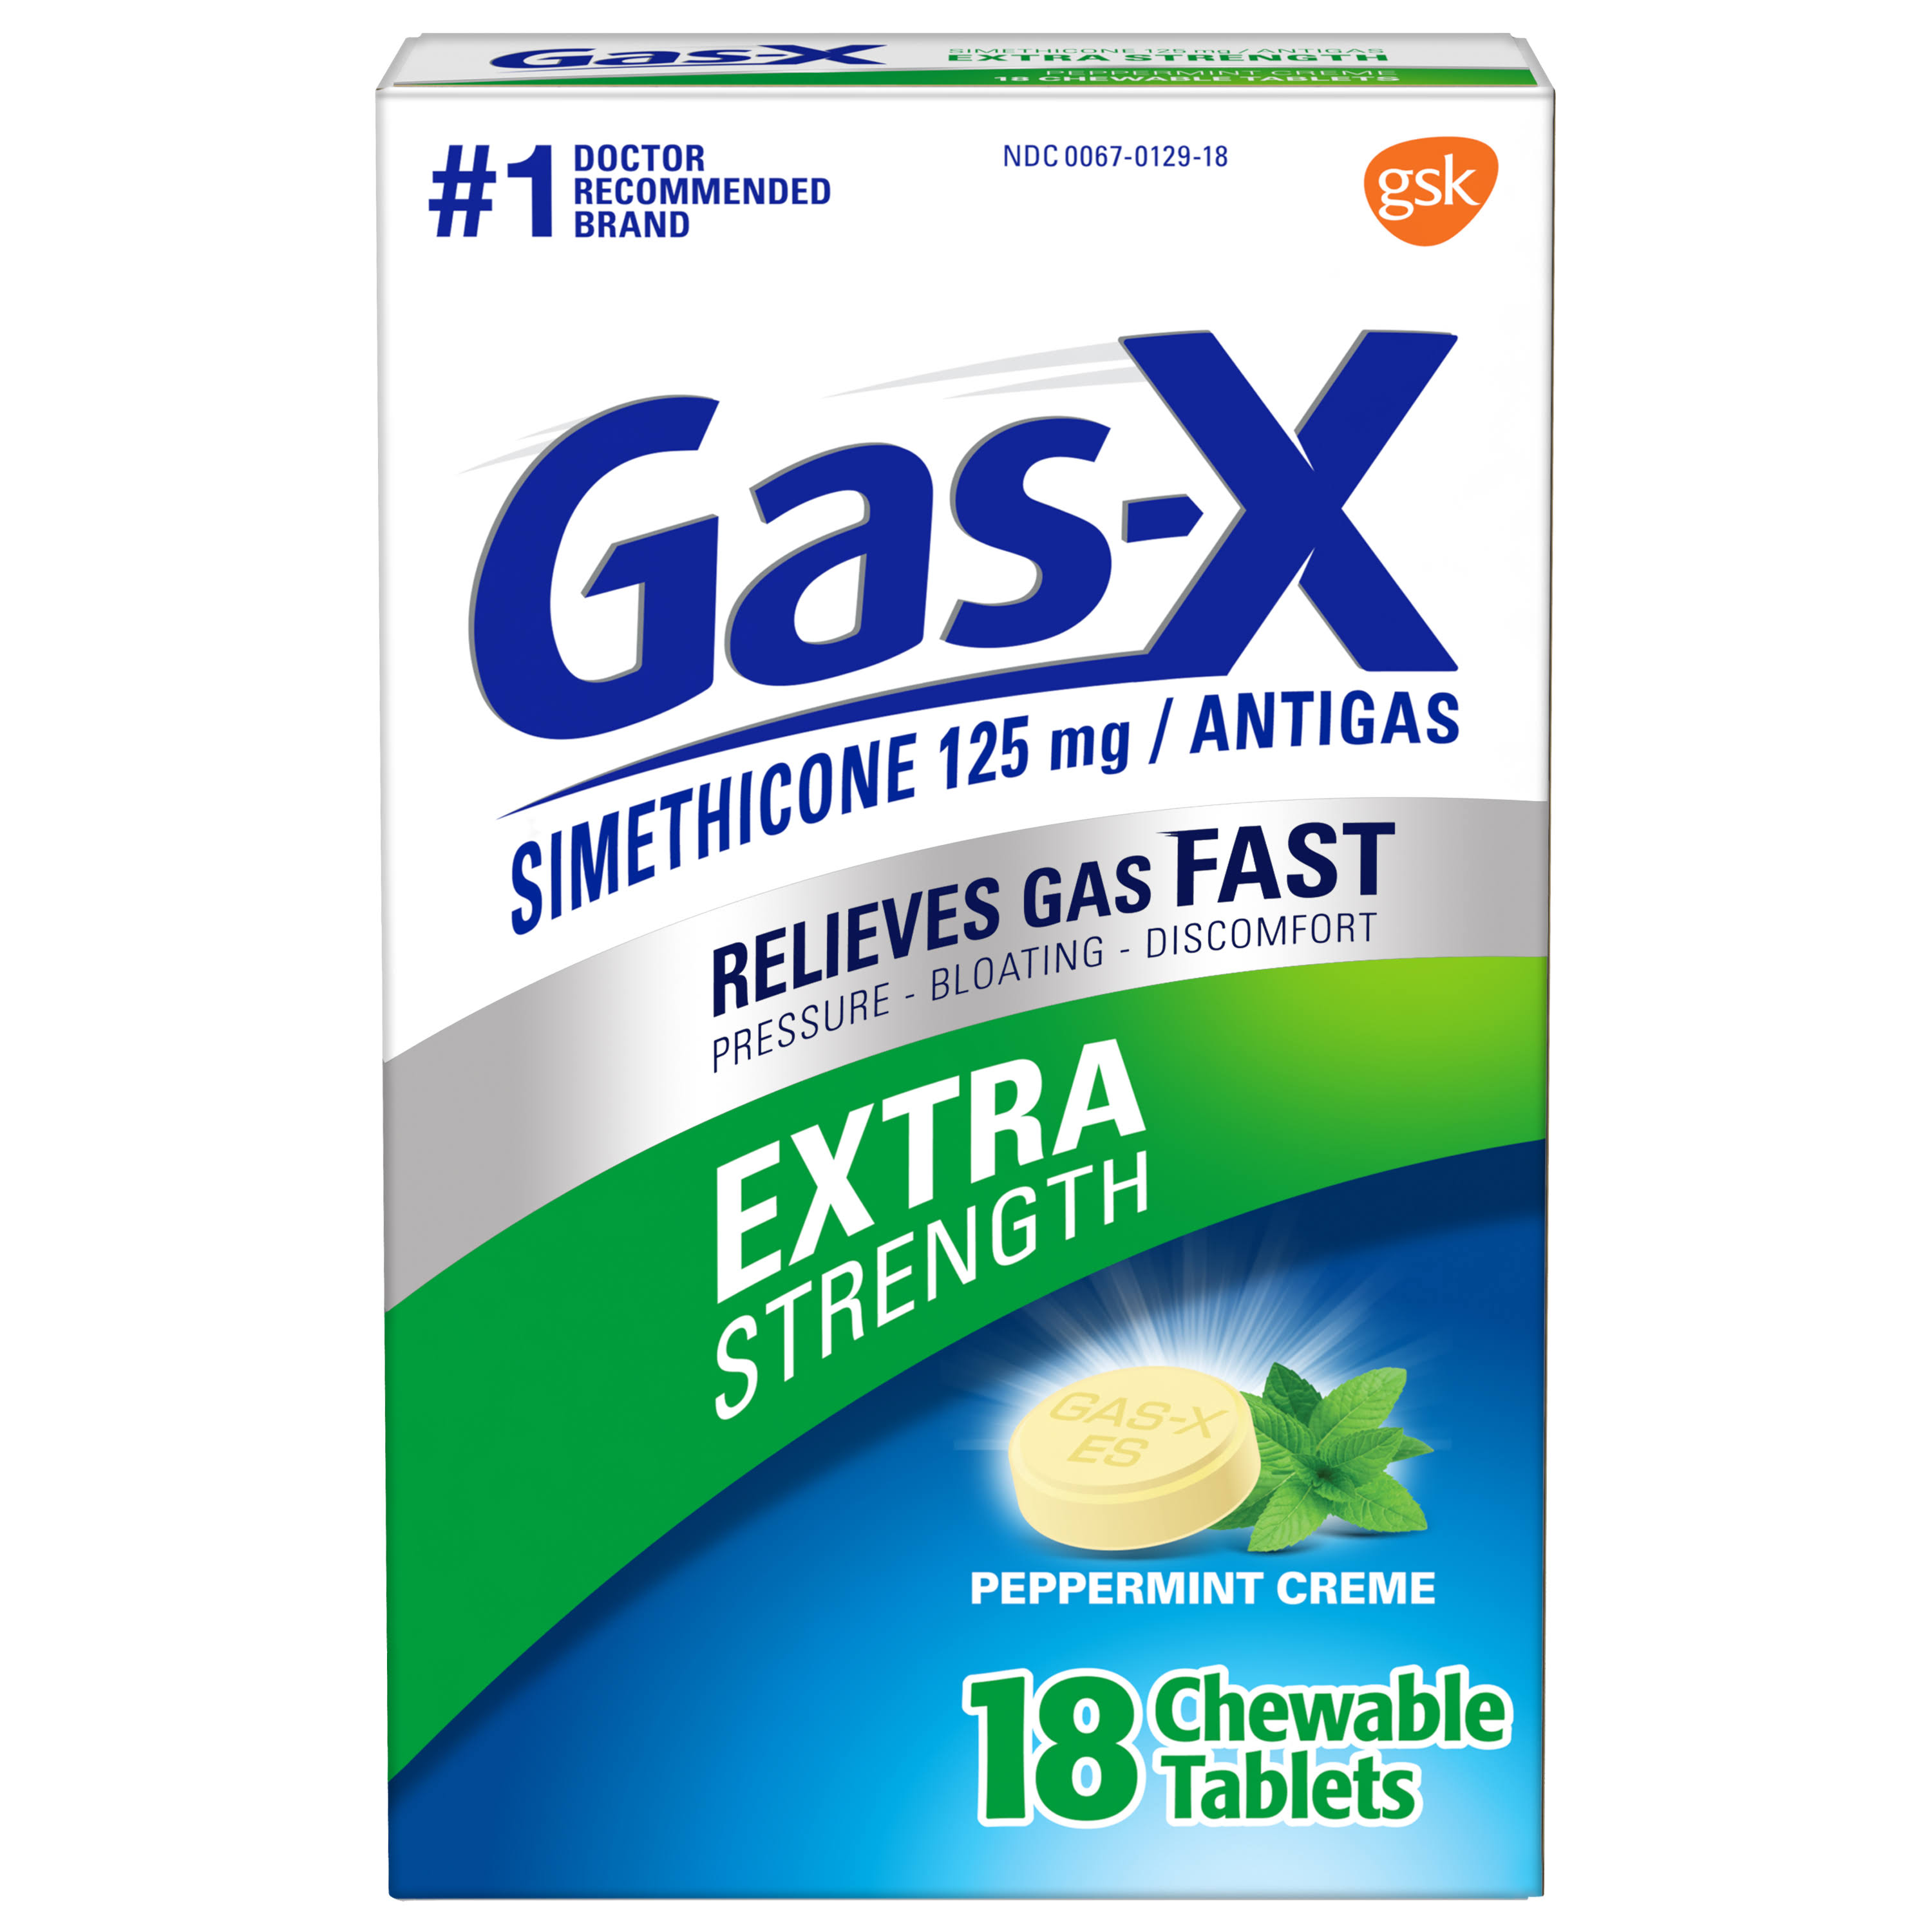 Gas X Chewable Extra Strength Tablets - Peppermint Creme, 18ct